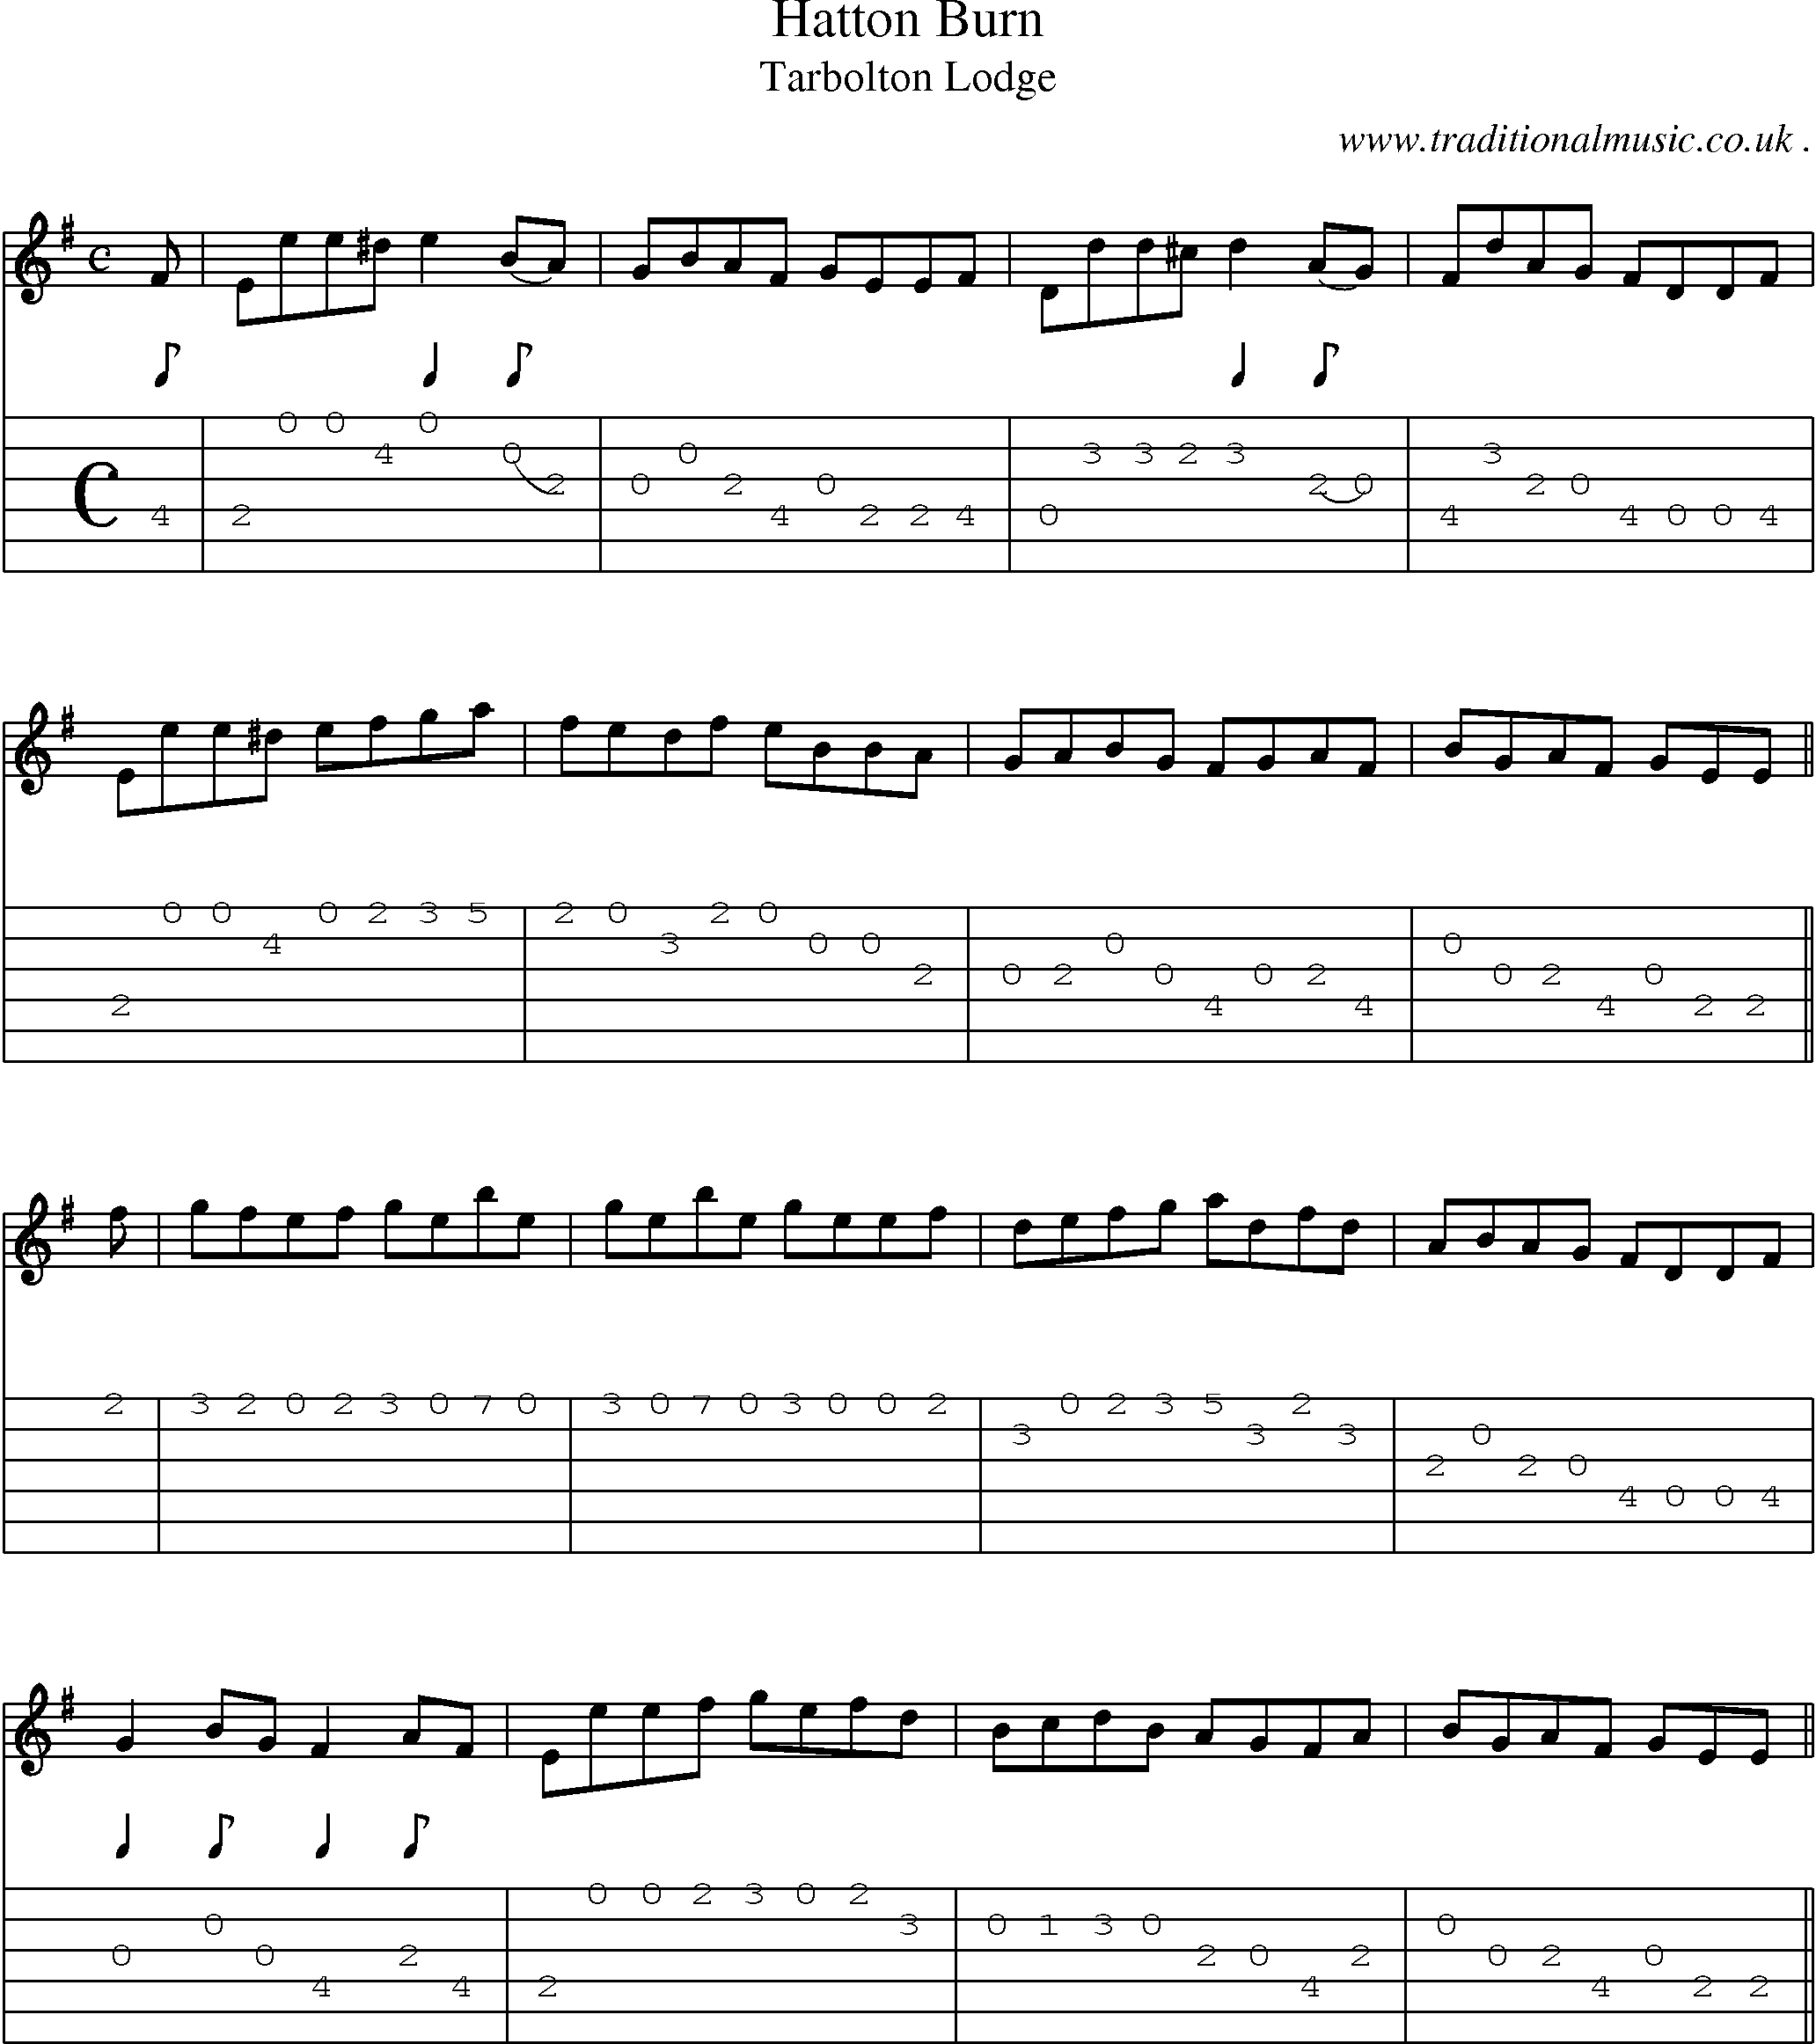 Sheet-music  score, Chords and Guitar Tabs for Hatton Burn